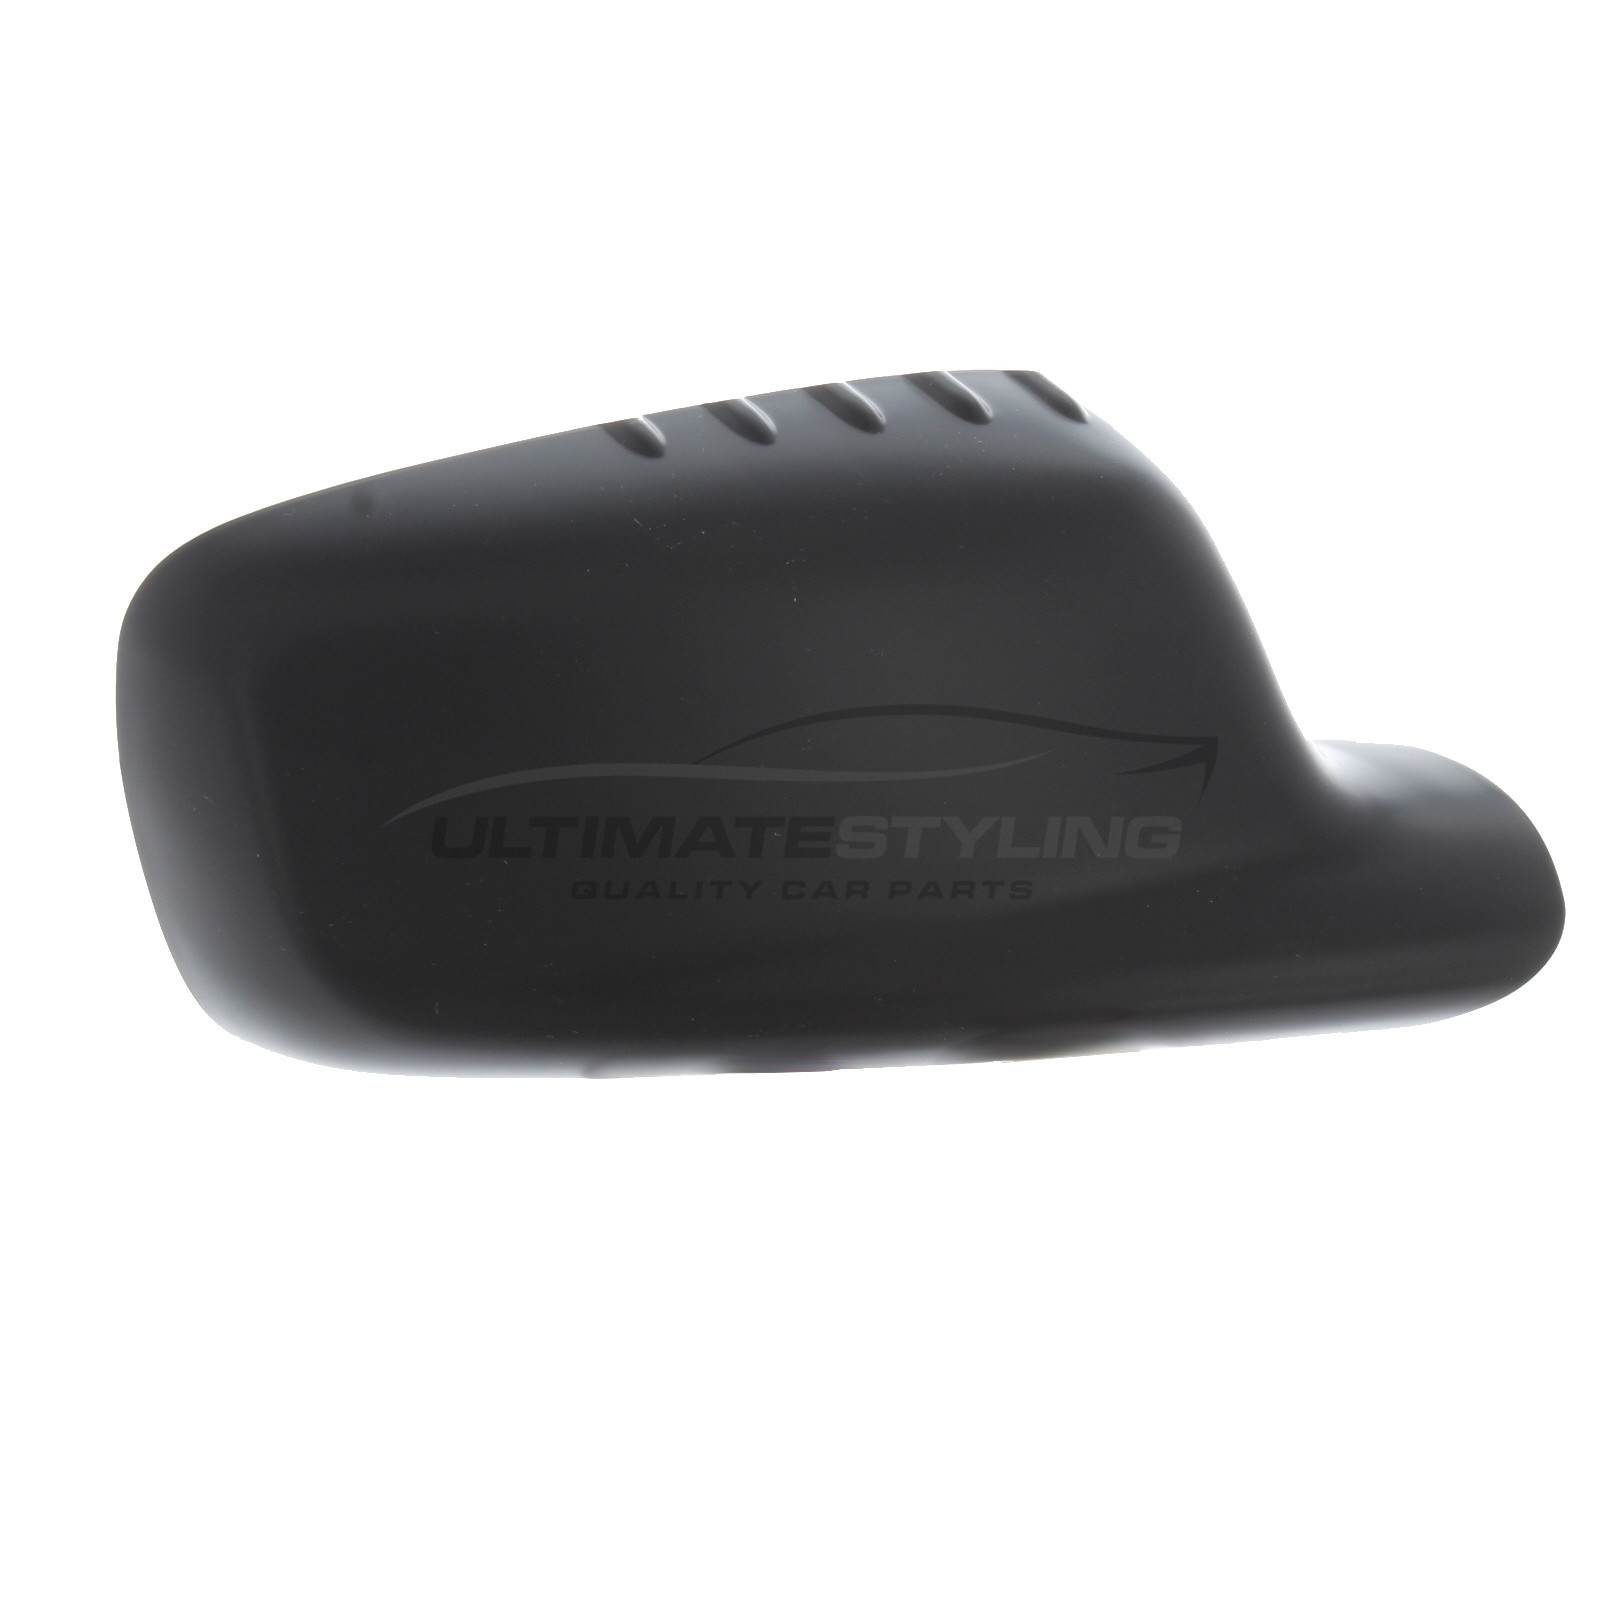 BMW 3 Series 1999-2007, BMW 7 Series 2001-2009 Wing Mirror Cover Cap Casing Black, Suitable for Painting Drivers Side (RH)